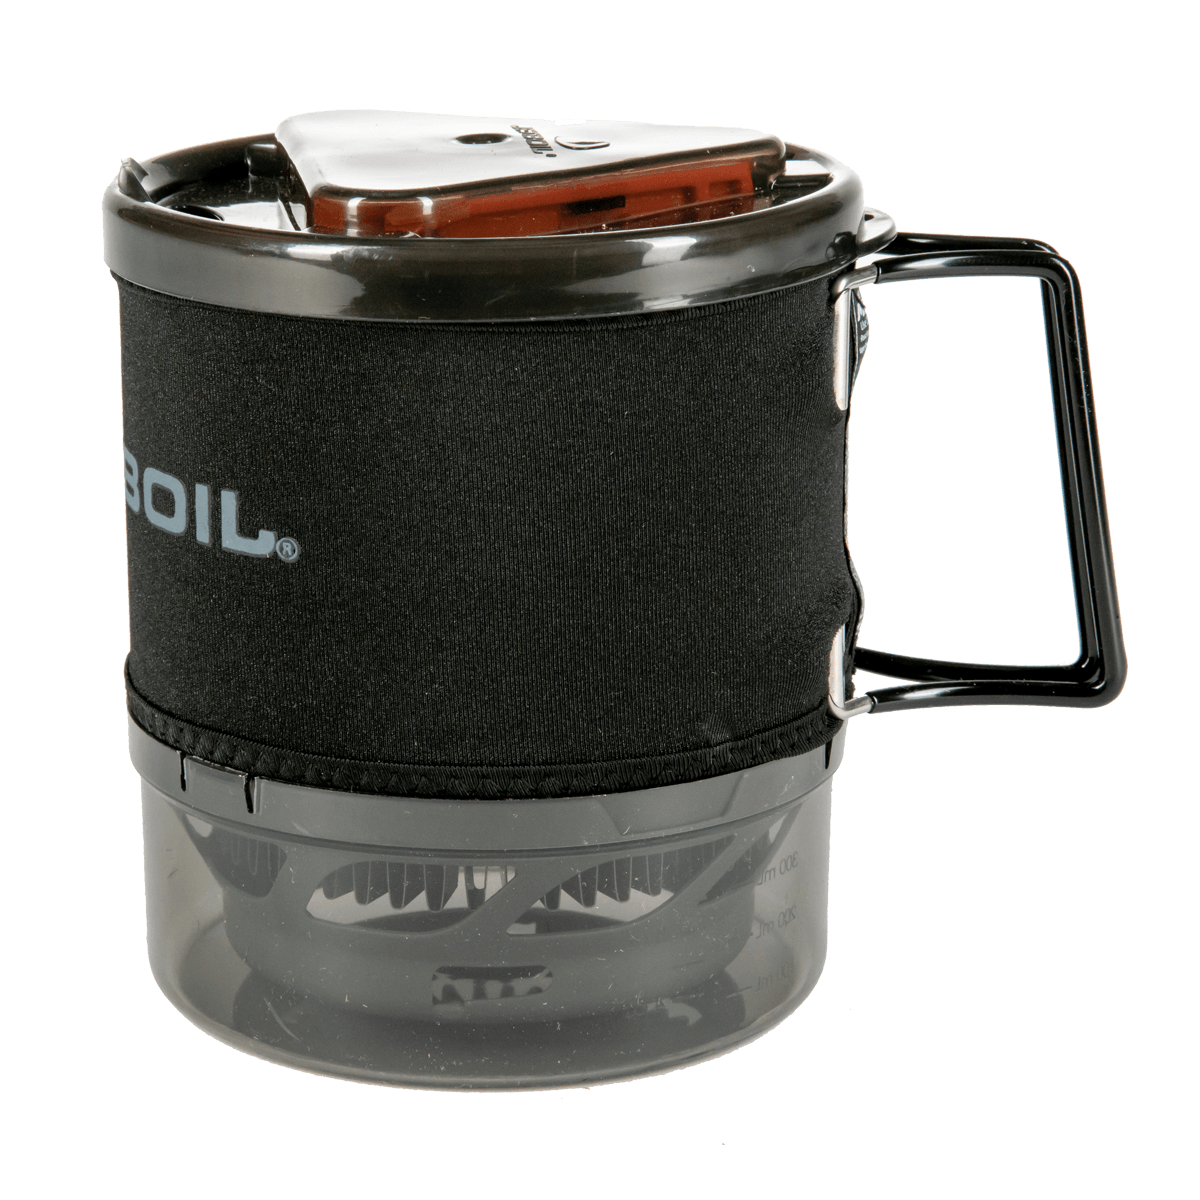 Jetboil MiniMo Cooking System | Carbon